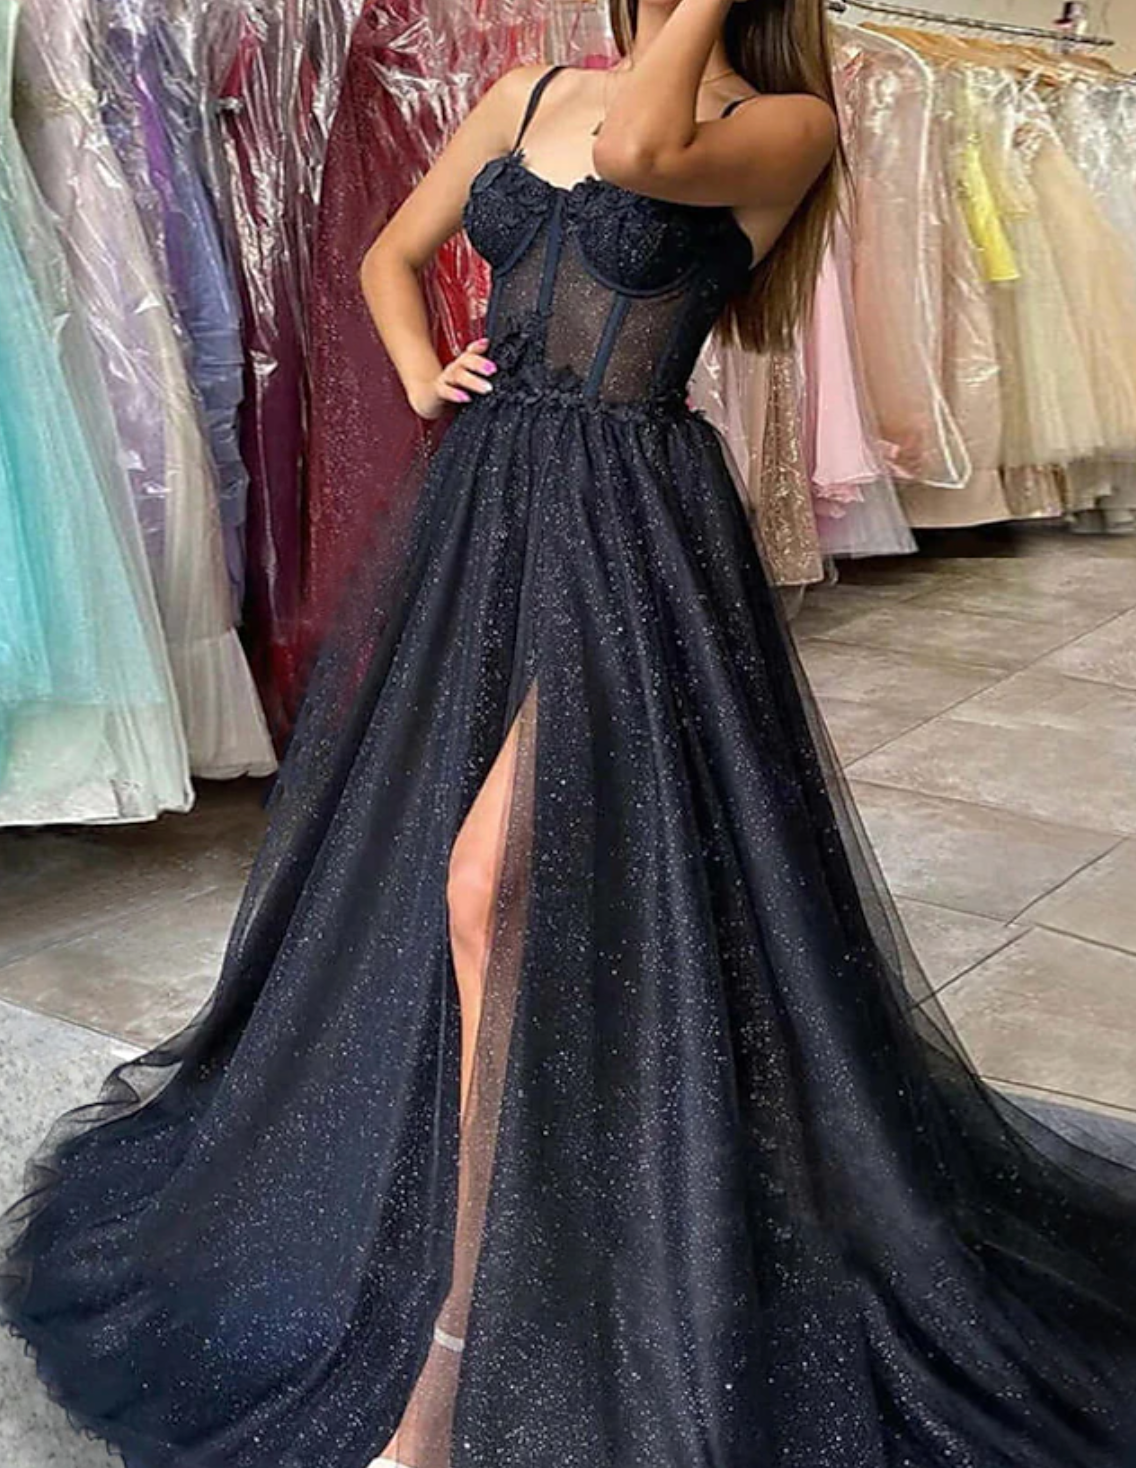 Princess Style Prom Dress With Lace up Back Girls Graduation Party Wear  Evening Dress Formal Dress Ball Party Gown - Etsy